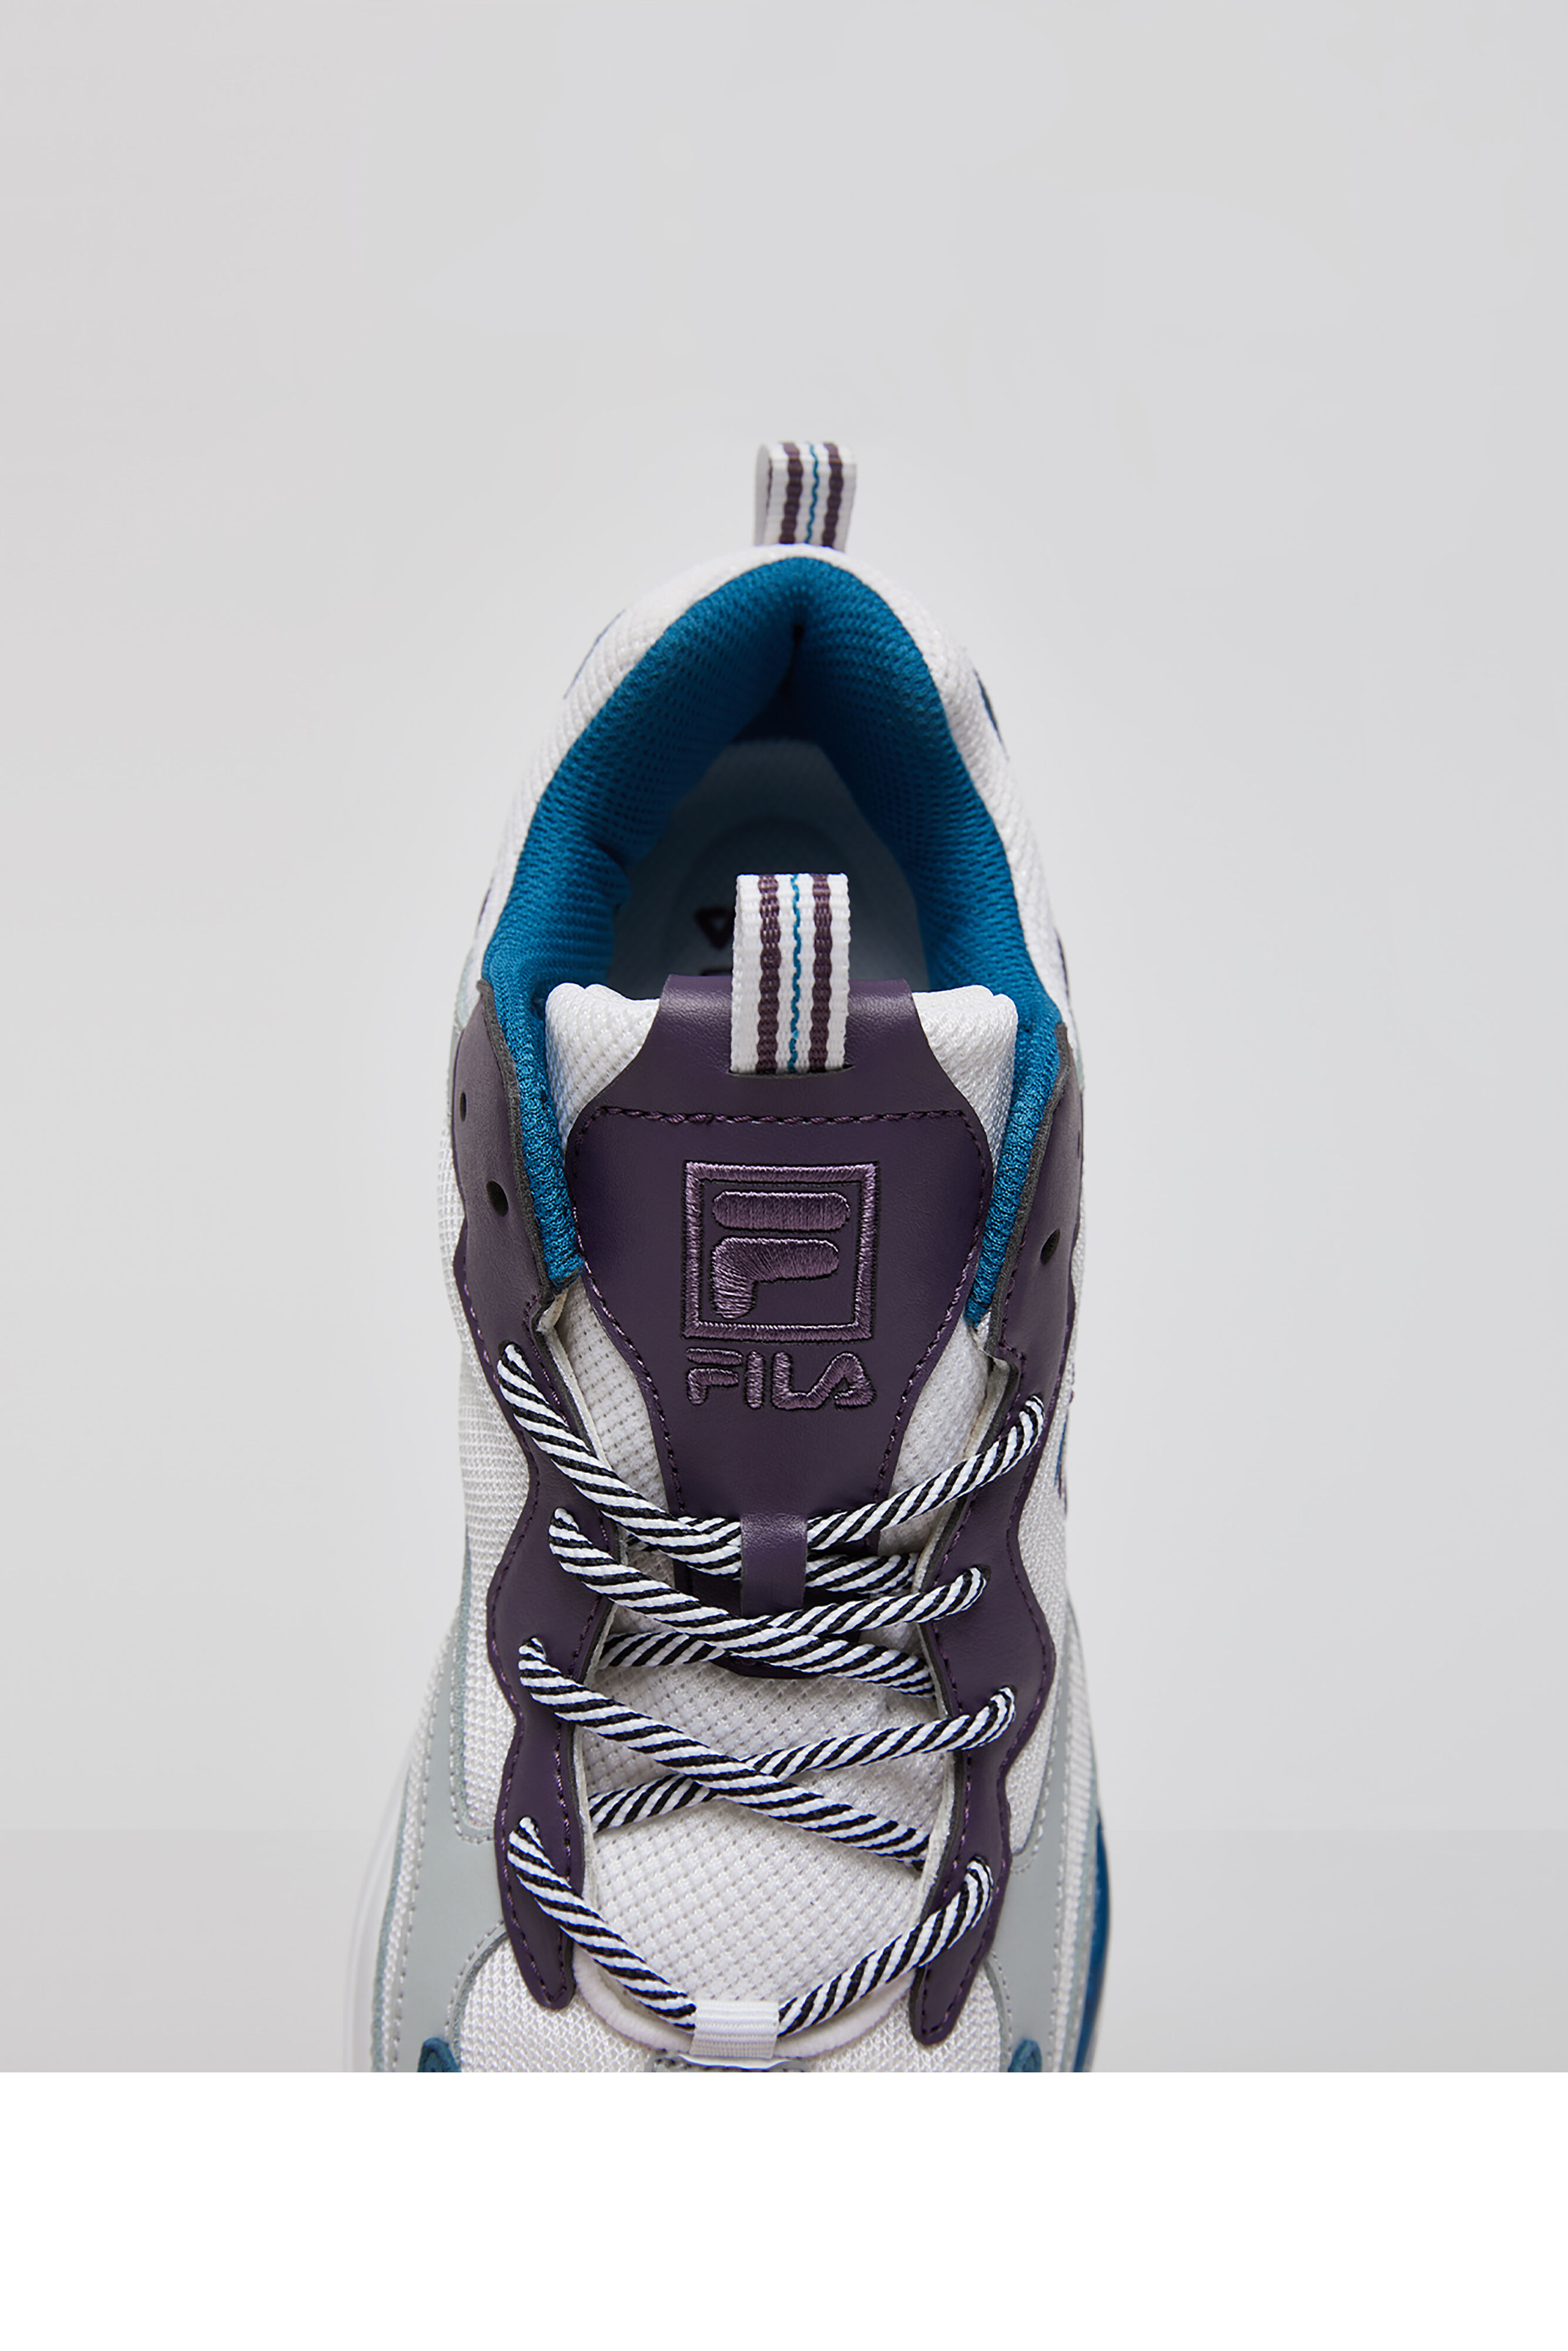 FILA Ray Tracer Apex - Pink Sneakers - Colorblock Sneakers - Lulus